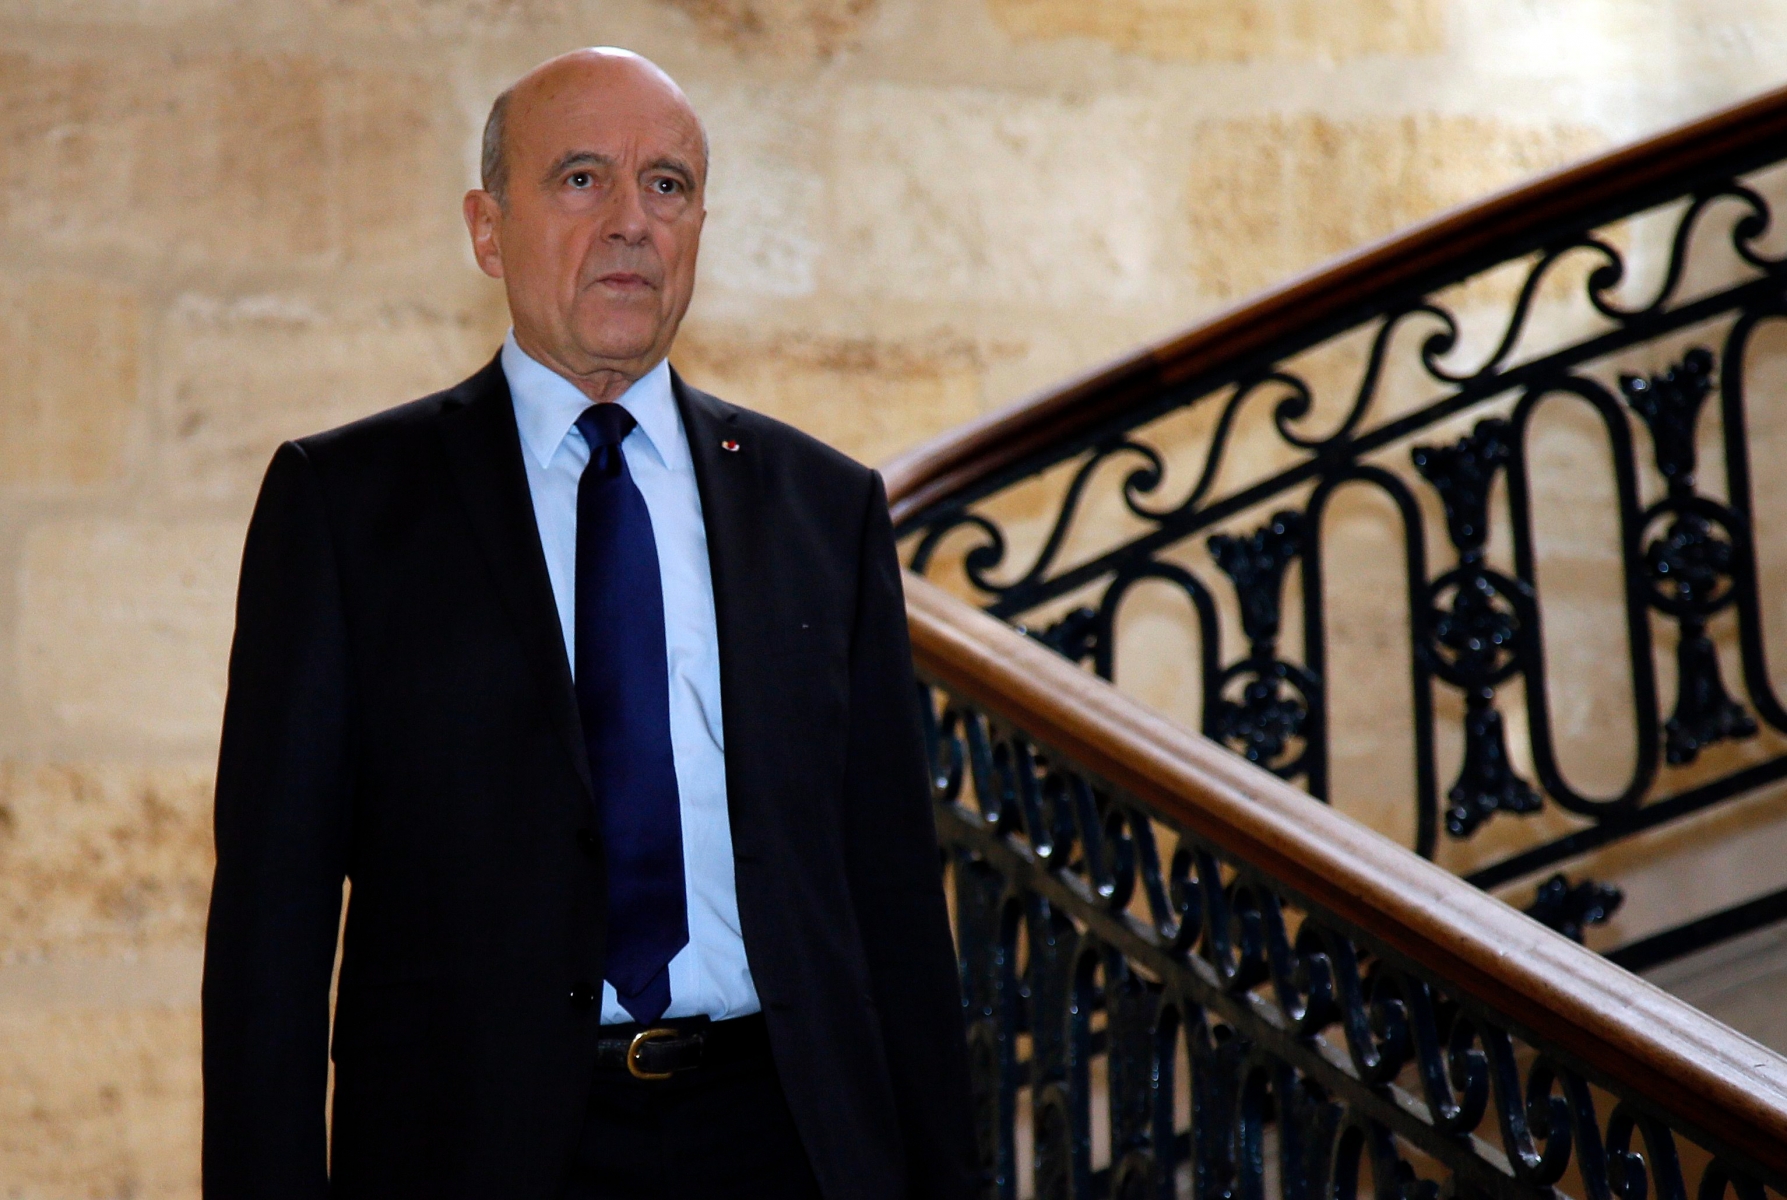 Former French prime minister Alain Juppe arrives for a press conference in Bordeaux, southwestern France, Monday, March 6, 2017. Juppe has confirmed that he won't be a replacement for the embattled conservative presidential candidate Francois Fillon if he decides to withdraw his bid. (AP Photo/Bob Edme) France Election